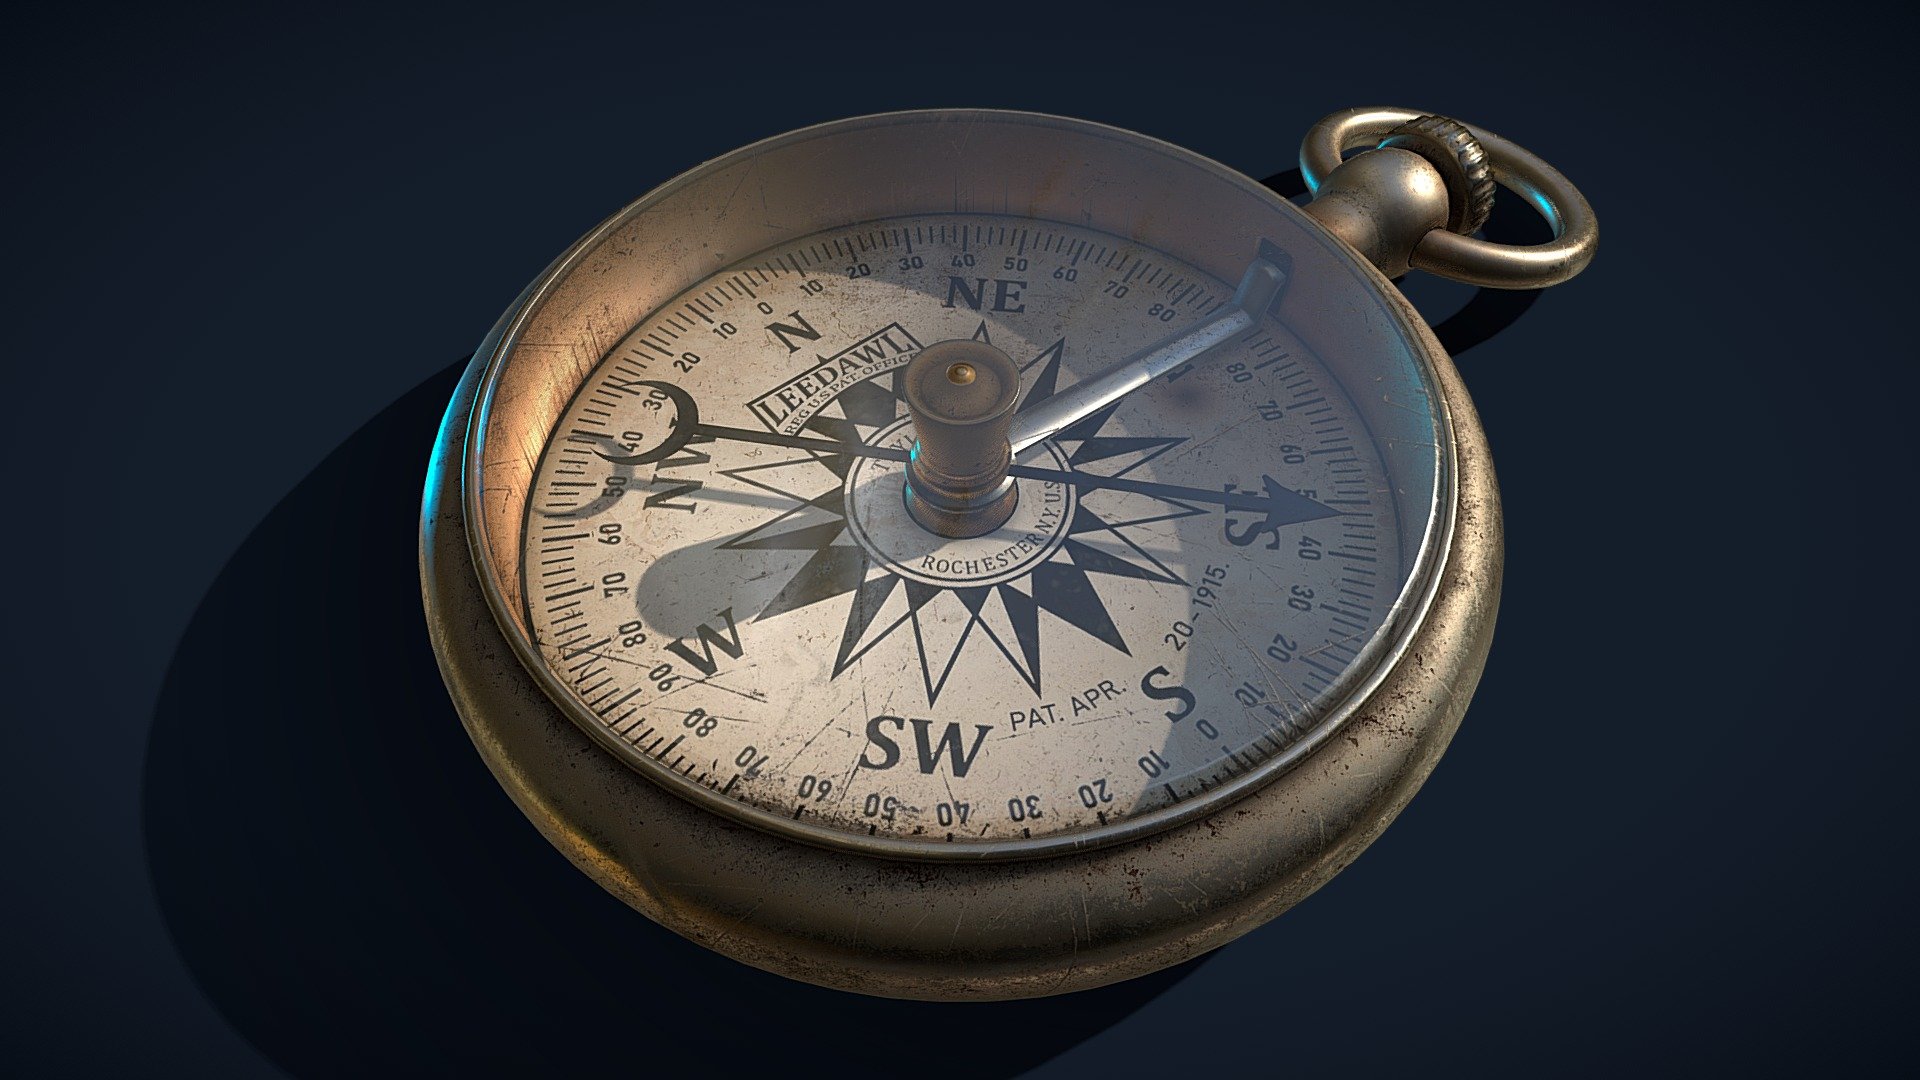 Model of the antique compass created in Blender, texturing - Substance Painter.
Special thanks for feedback to Anton Ageev (https://www.artstation.com/grim)
Project on my Artstation https://www.artstation.com/artwork/Vg8AXR - Compass - 3D model by kbohush 3d model